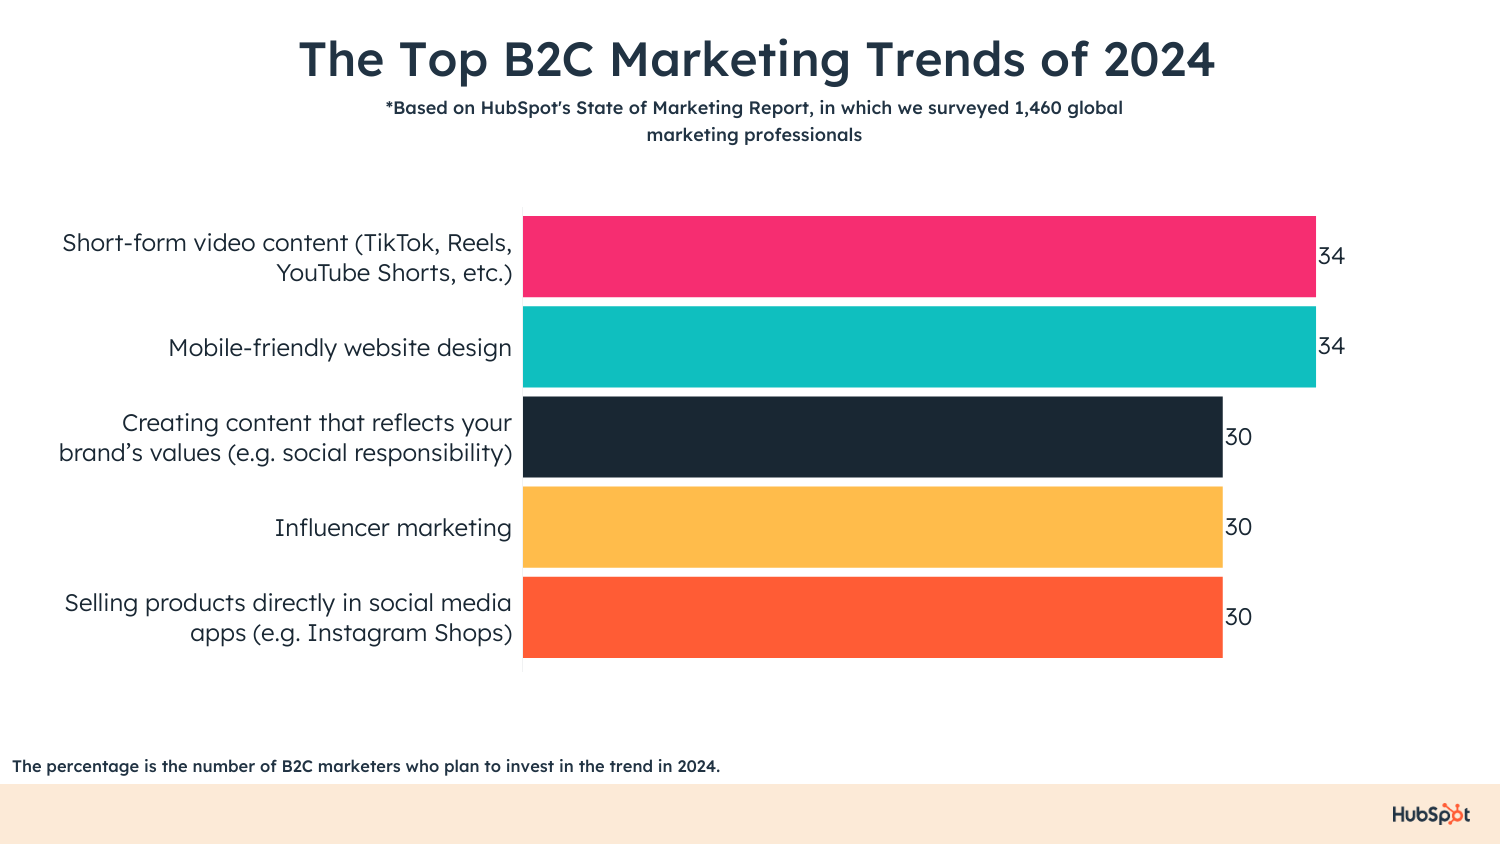 the%20top%20b2c%20marketing%20trends%20of%202024.png?width=1500&height=844&name=the%20top%20b2c%20marketing%20trends%20of%202024 - The Top 5 B2C Marketing Trends of 2024 [New HubSpot Blog Data + Expert Insights]